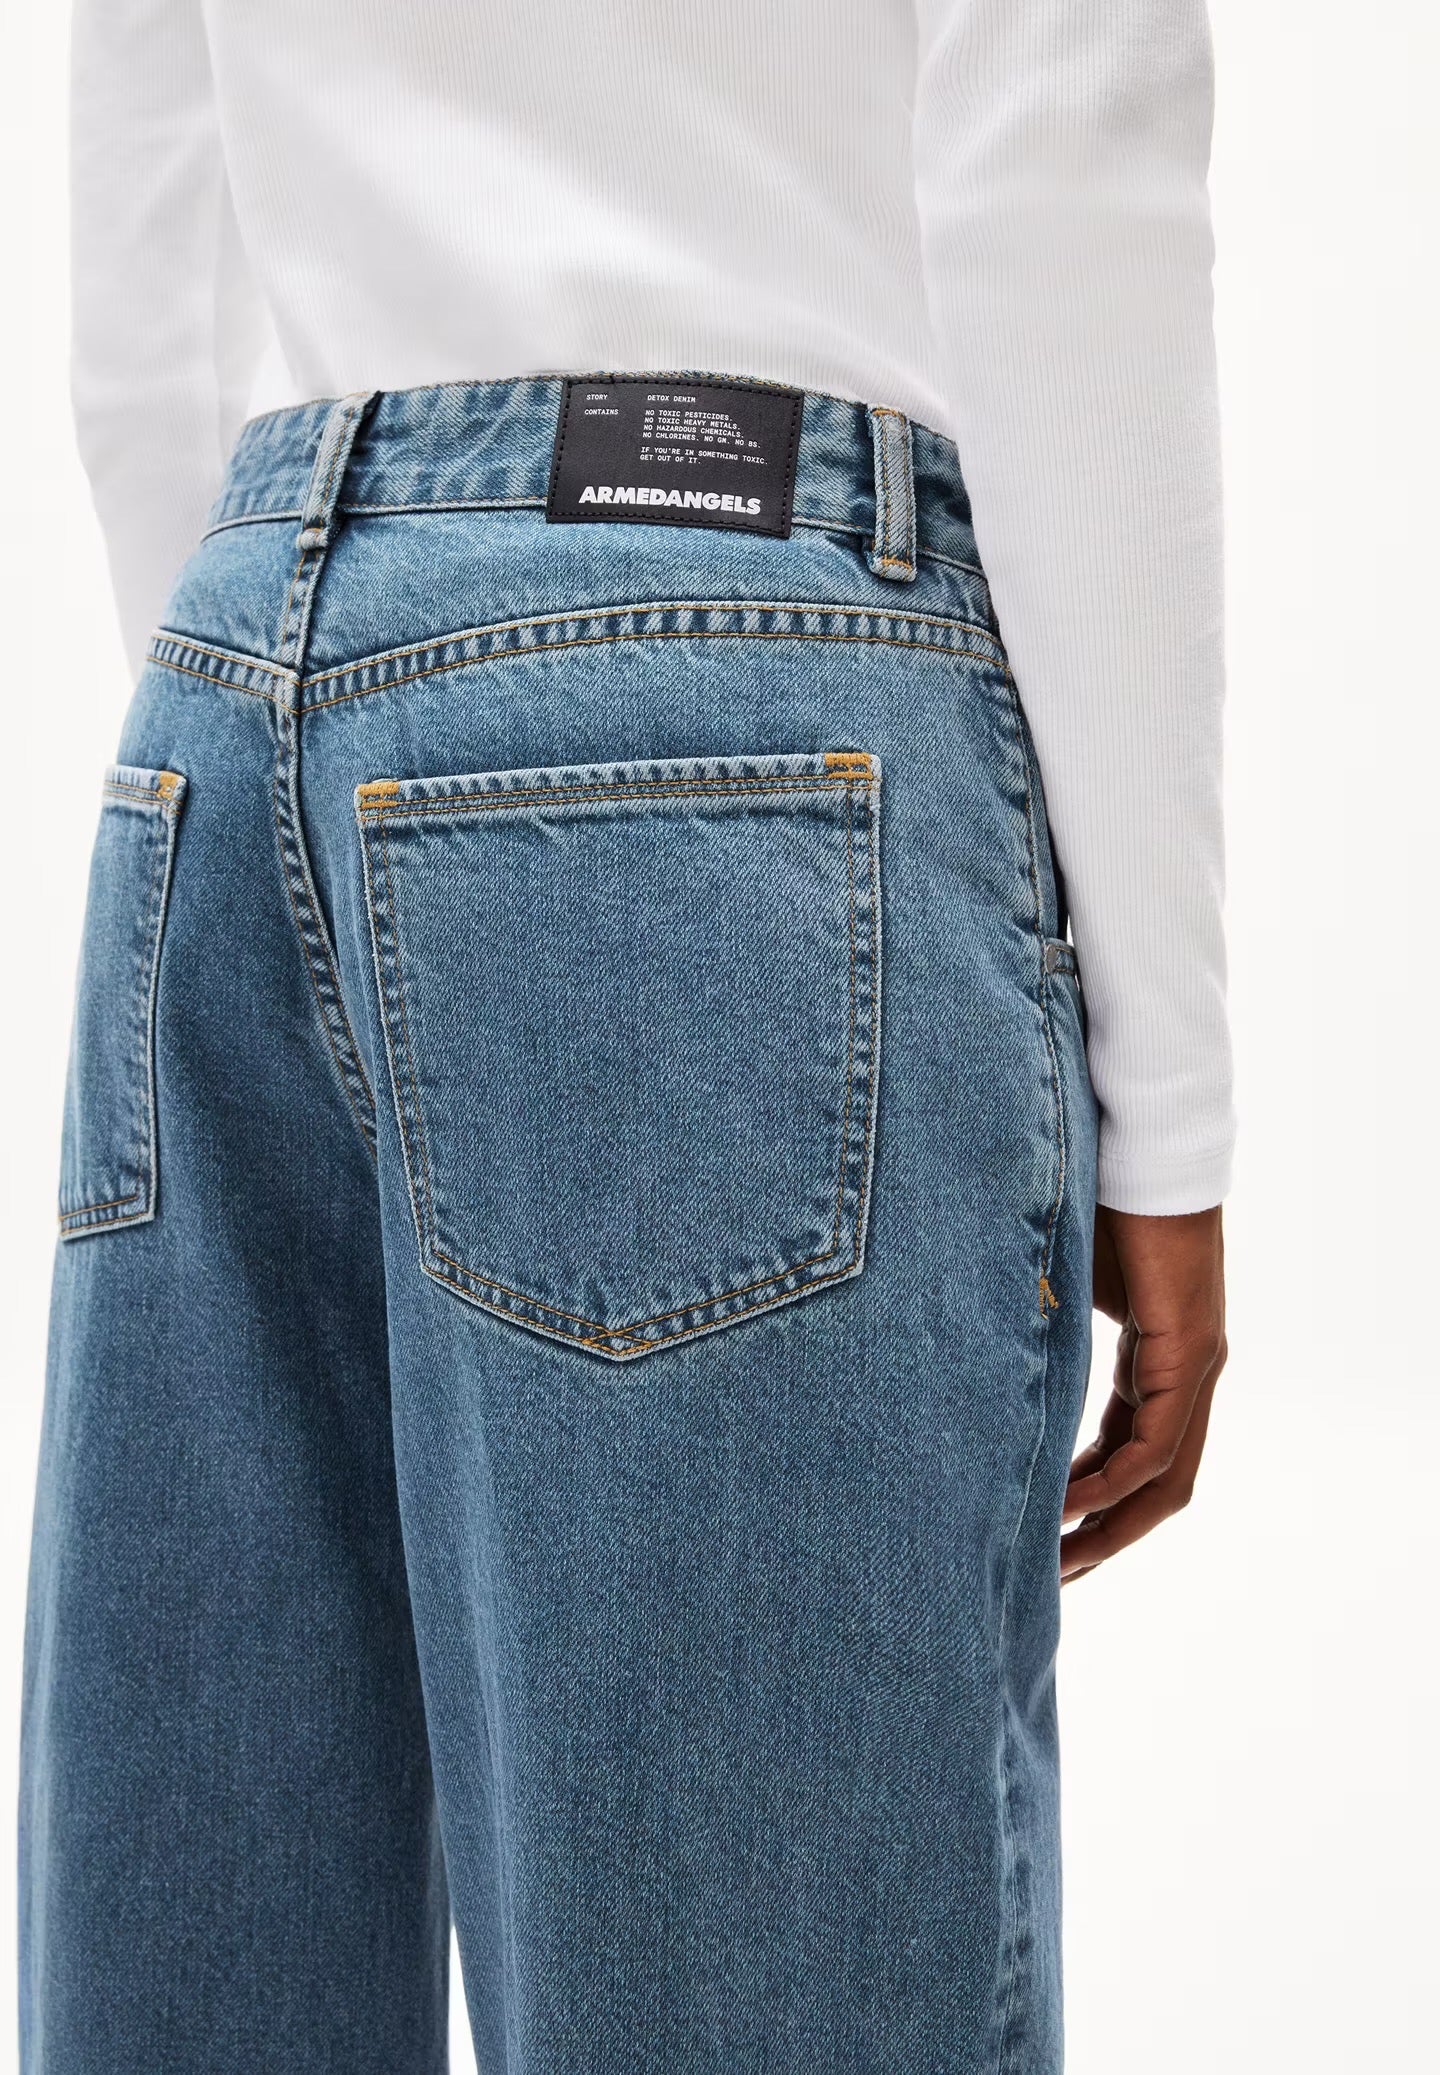 HAAYI BAGGY FIT JEANS | INDIGO STONE